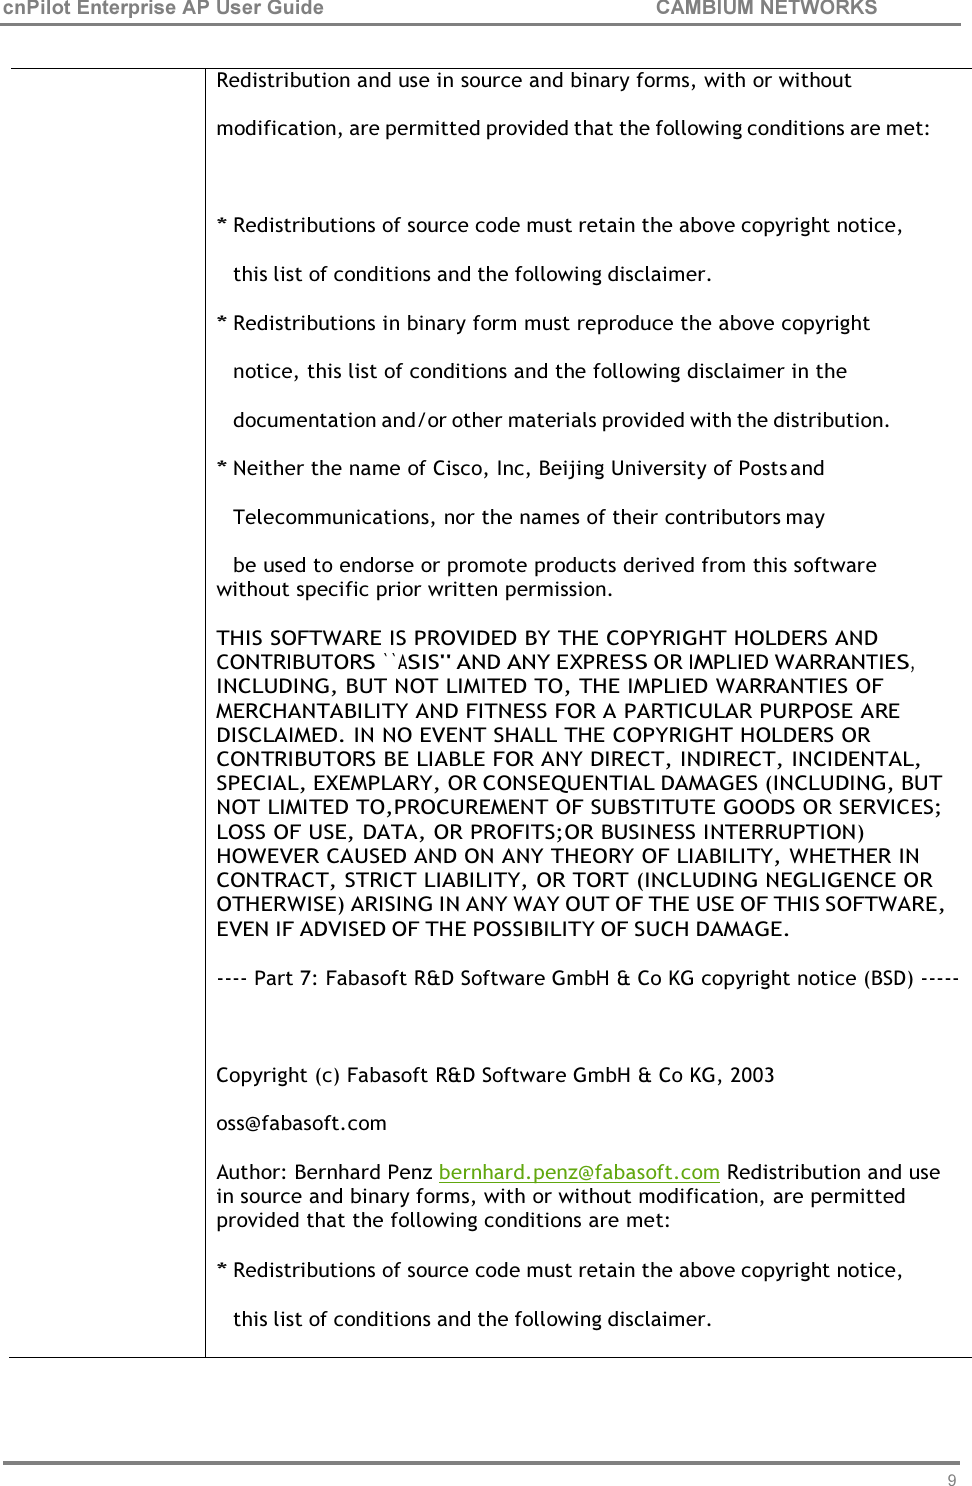 95 cnPilot Enterprise AP User Guide CAMBIUM NETWORKS      Redistribution and use in source and binary forms, with or without modification, are permitted provided that the following conditions are met:  * Redistributions of source code must retain the above copyright notice, this list of conditions and the following disclaimer. * Redistributions in binary form must reproduce the above copyright notice, this list of conditions and the following disclaimer in the documentation and/or other materials provided with the distribution. * Neither the name of Cisco, Inc, Beijing University of Posts and Telecommunications, nor the names of their contributors may be used to endorse or promote products derived from this software without specific prior written permission.  THIS SOFTWARE IS PROVIDED BY THE COPYRIGHT HOLDERS AND CONTRIBUTORS ``ASIS&apos;&apos; AND ANY EXPRESS OR IMPLIED WARRANTIES, INCLUDING, BUT NOT LIMITED TO, THE IMPLIED WARRANTIES OF MERCHANTABILITY AND FITNESS FOR A PARTICULAR PURPOSE ARE DISCLAIMED. IN NO EVENT SHALL THE COPYRIGHT HOLDERS OR CONTRIBUTORS BE LIABLE FOR ANY DIRECT, INDIRECT, INCIDENTAL, SPECIAL, EXEMPLARY, OR CONSEQUENTIAL DAMAGES (INCLUDING, BUT NOT LIMITED TO,PROCUREMENT OF SUBSTITUTE GOODS OR SERVICES; LOSS OF USE, DATA, OR PROFITS;OR BUSINESS INTERRUPTION) HOWEVER CAUSED AND ON ANY THEORY OF LIABILITY, WHETHER IN CONTRACT, STRICT LIABILITY, OR TORT (INCLUDING NEGLIGENCE OR OTHERWISE) ARISING IN ANY WAY OUT OF THE USE OF THIS SOFTWARE, EVEN IF ADVISED OF THE POSSIBILITY OF SUCH DAMAGE.  ---- Part 7: Fabasoft R&amp;D Software GmbH &amp; Co KG copyright notice (BSD) -----   Copyright (c) Fabasoft R&amp;D Software GmbH &amp; Co KG, 2003 oss@fabasoft.com Author: Bernhard Penz bernhard.penz@fabasoft.com Redistribution and use in source and binary forms, with or without modification, are permitted provided that the following conditions are met: * Redistributions of source code must retain the above copyright notice, this list of conditions and the following disclaimer. 